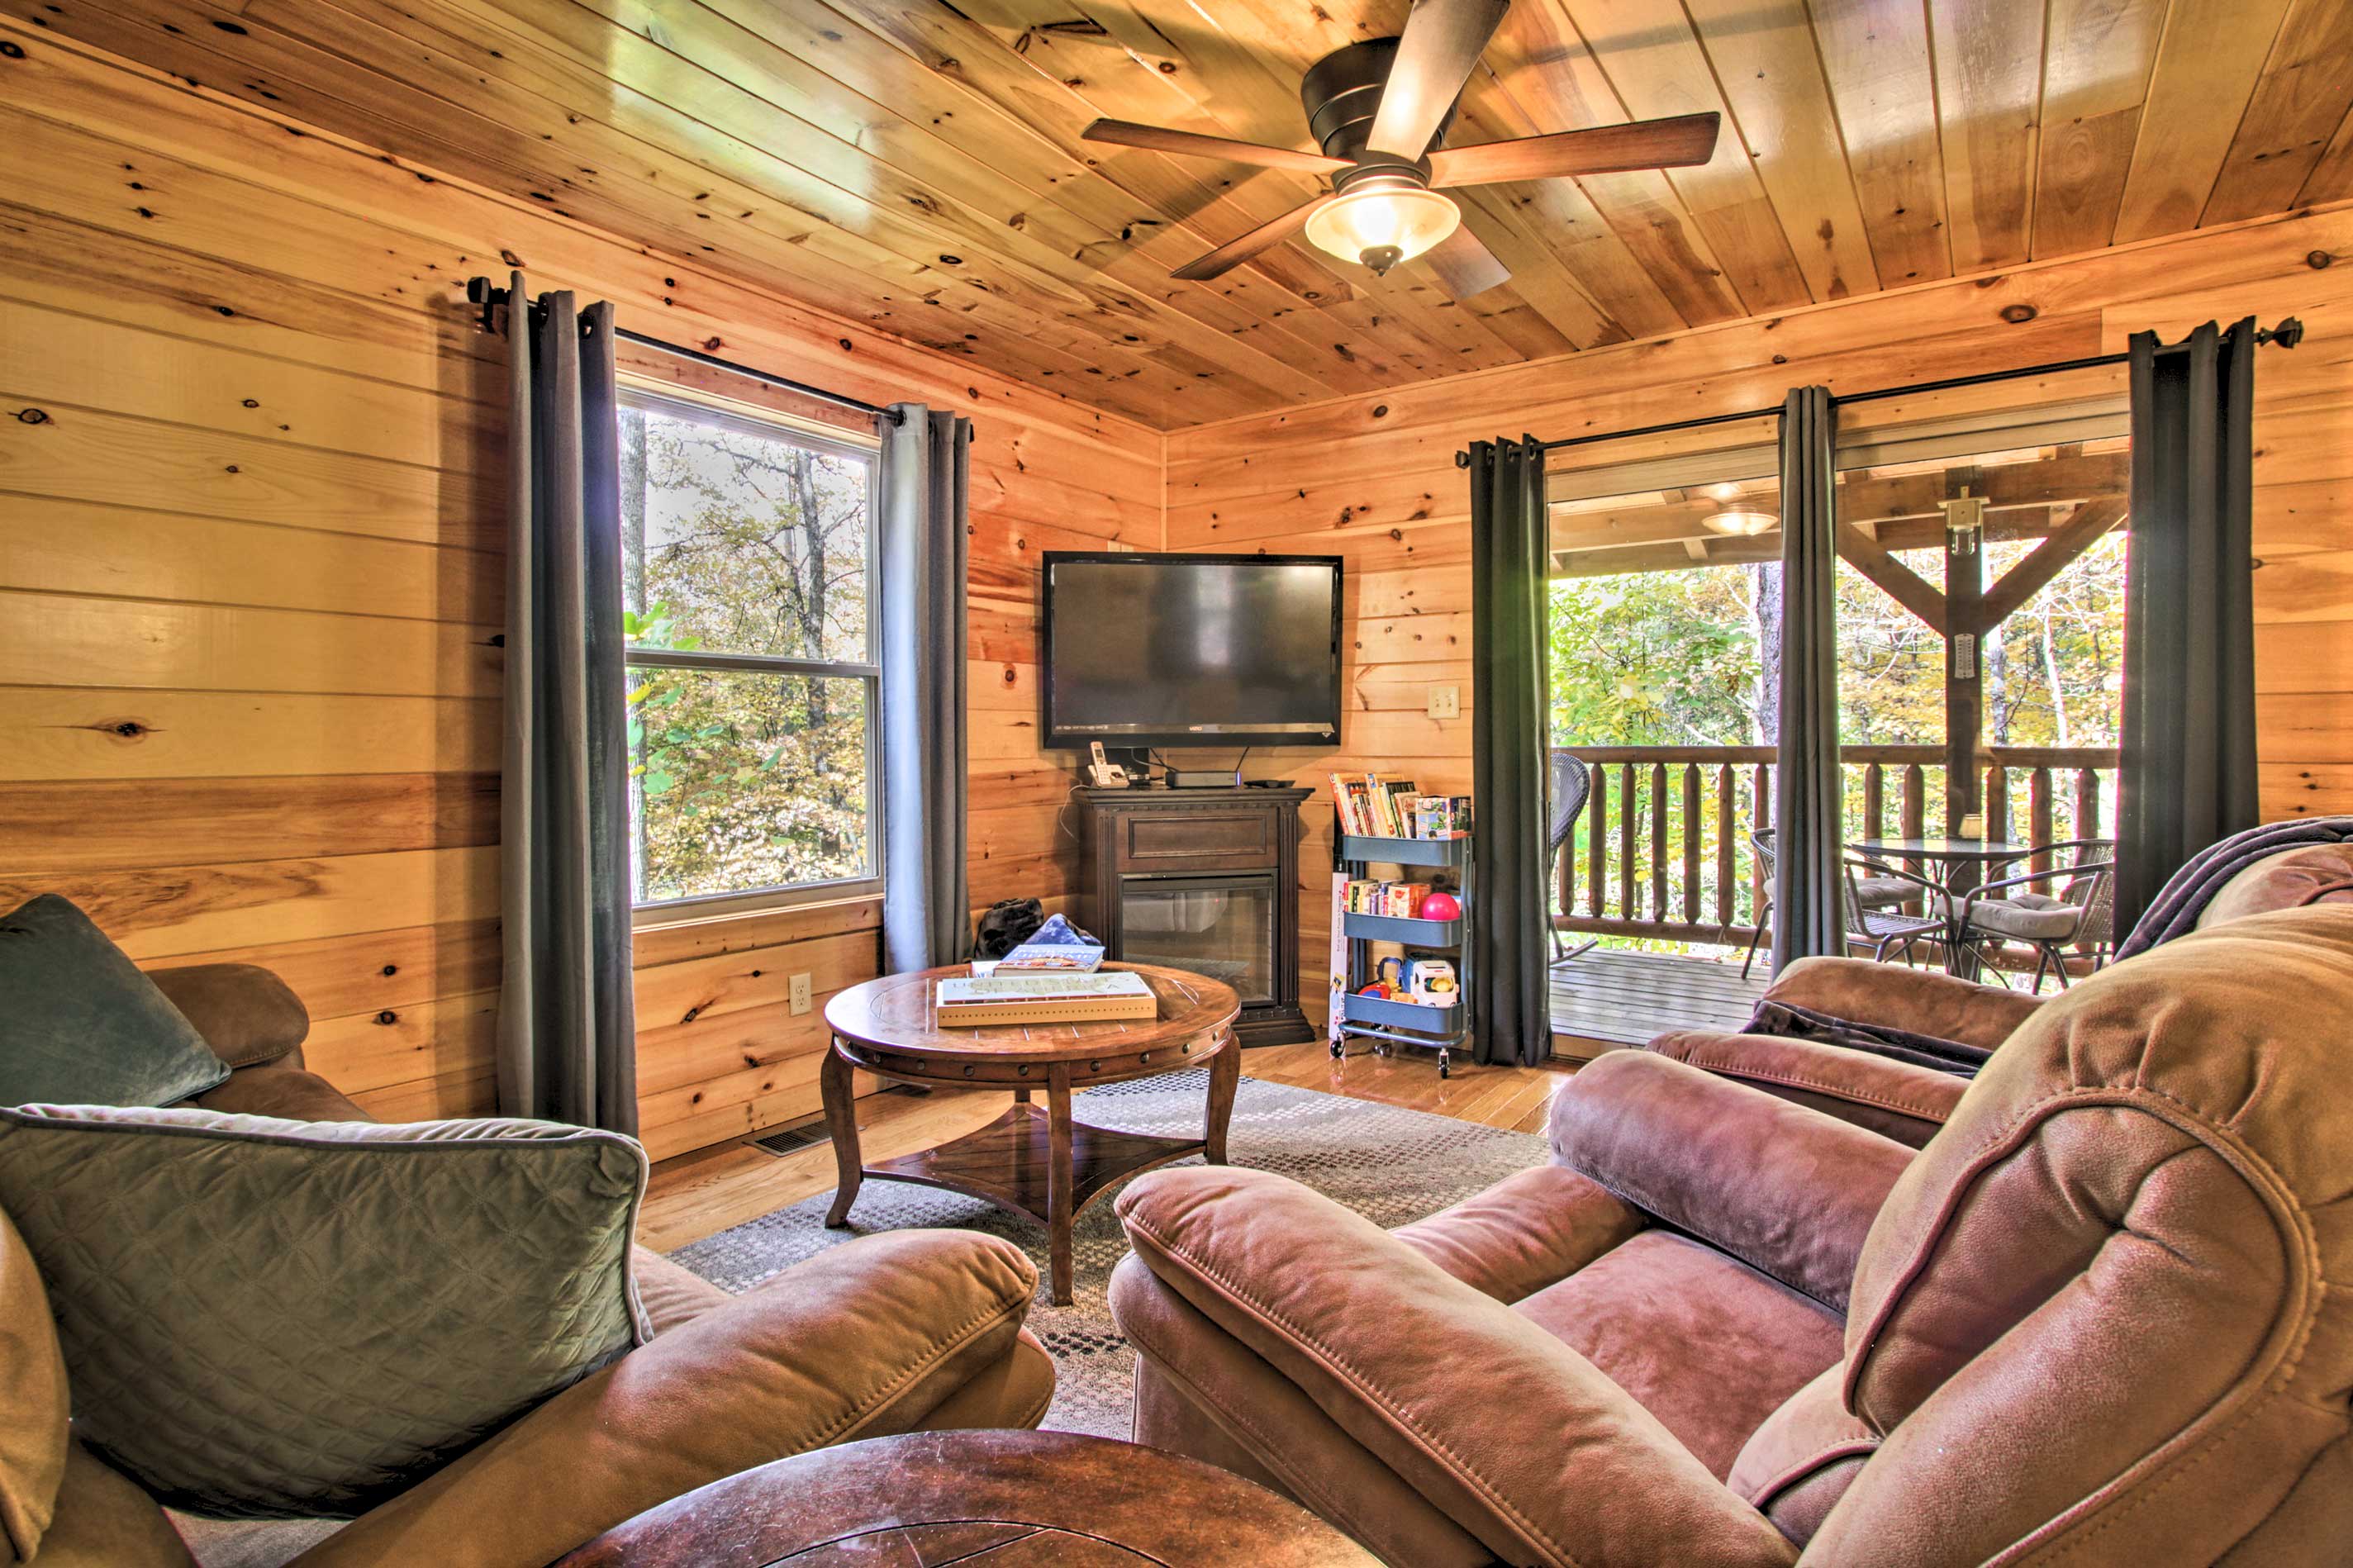 With 3 bedrooms and 2.5 bathrooms, this vacation rental offers room for 6!